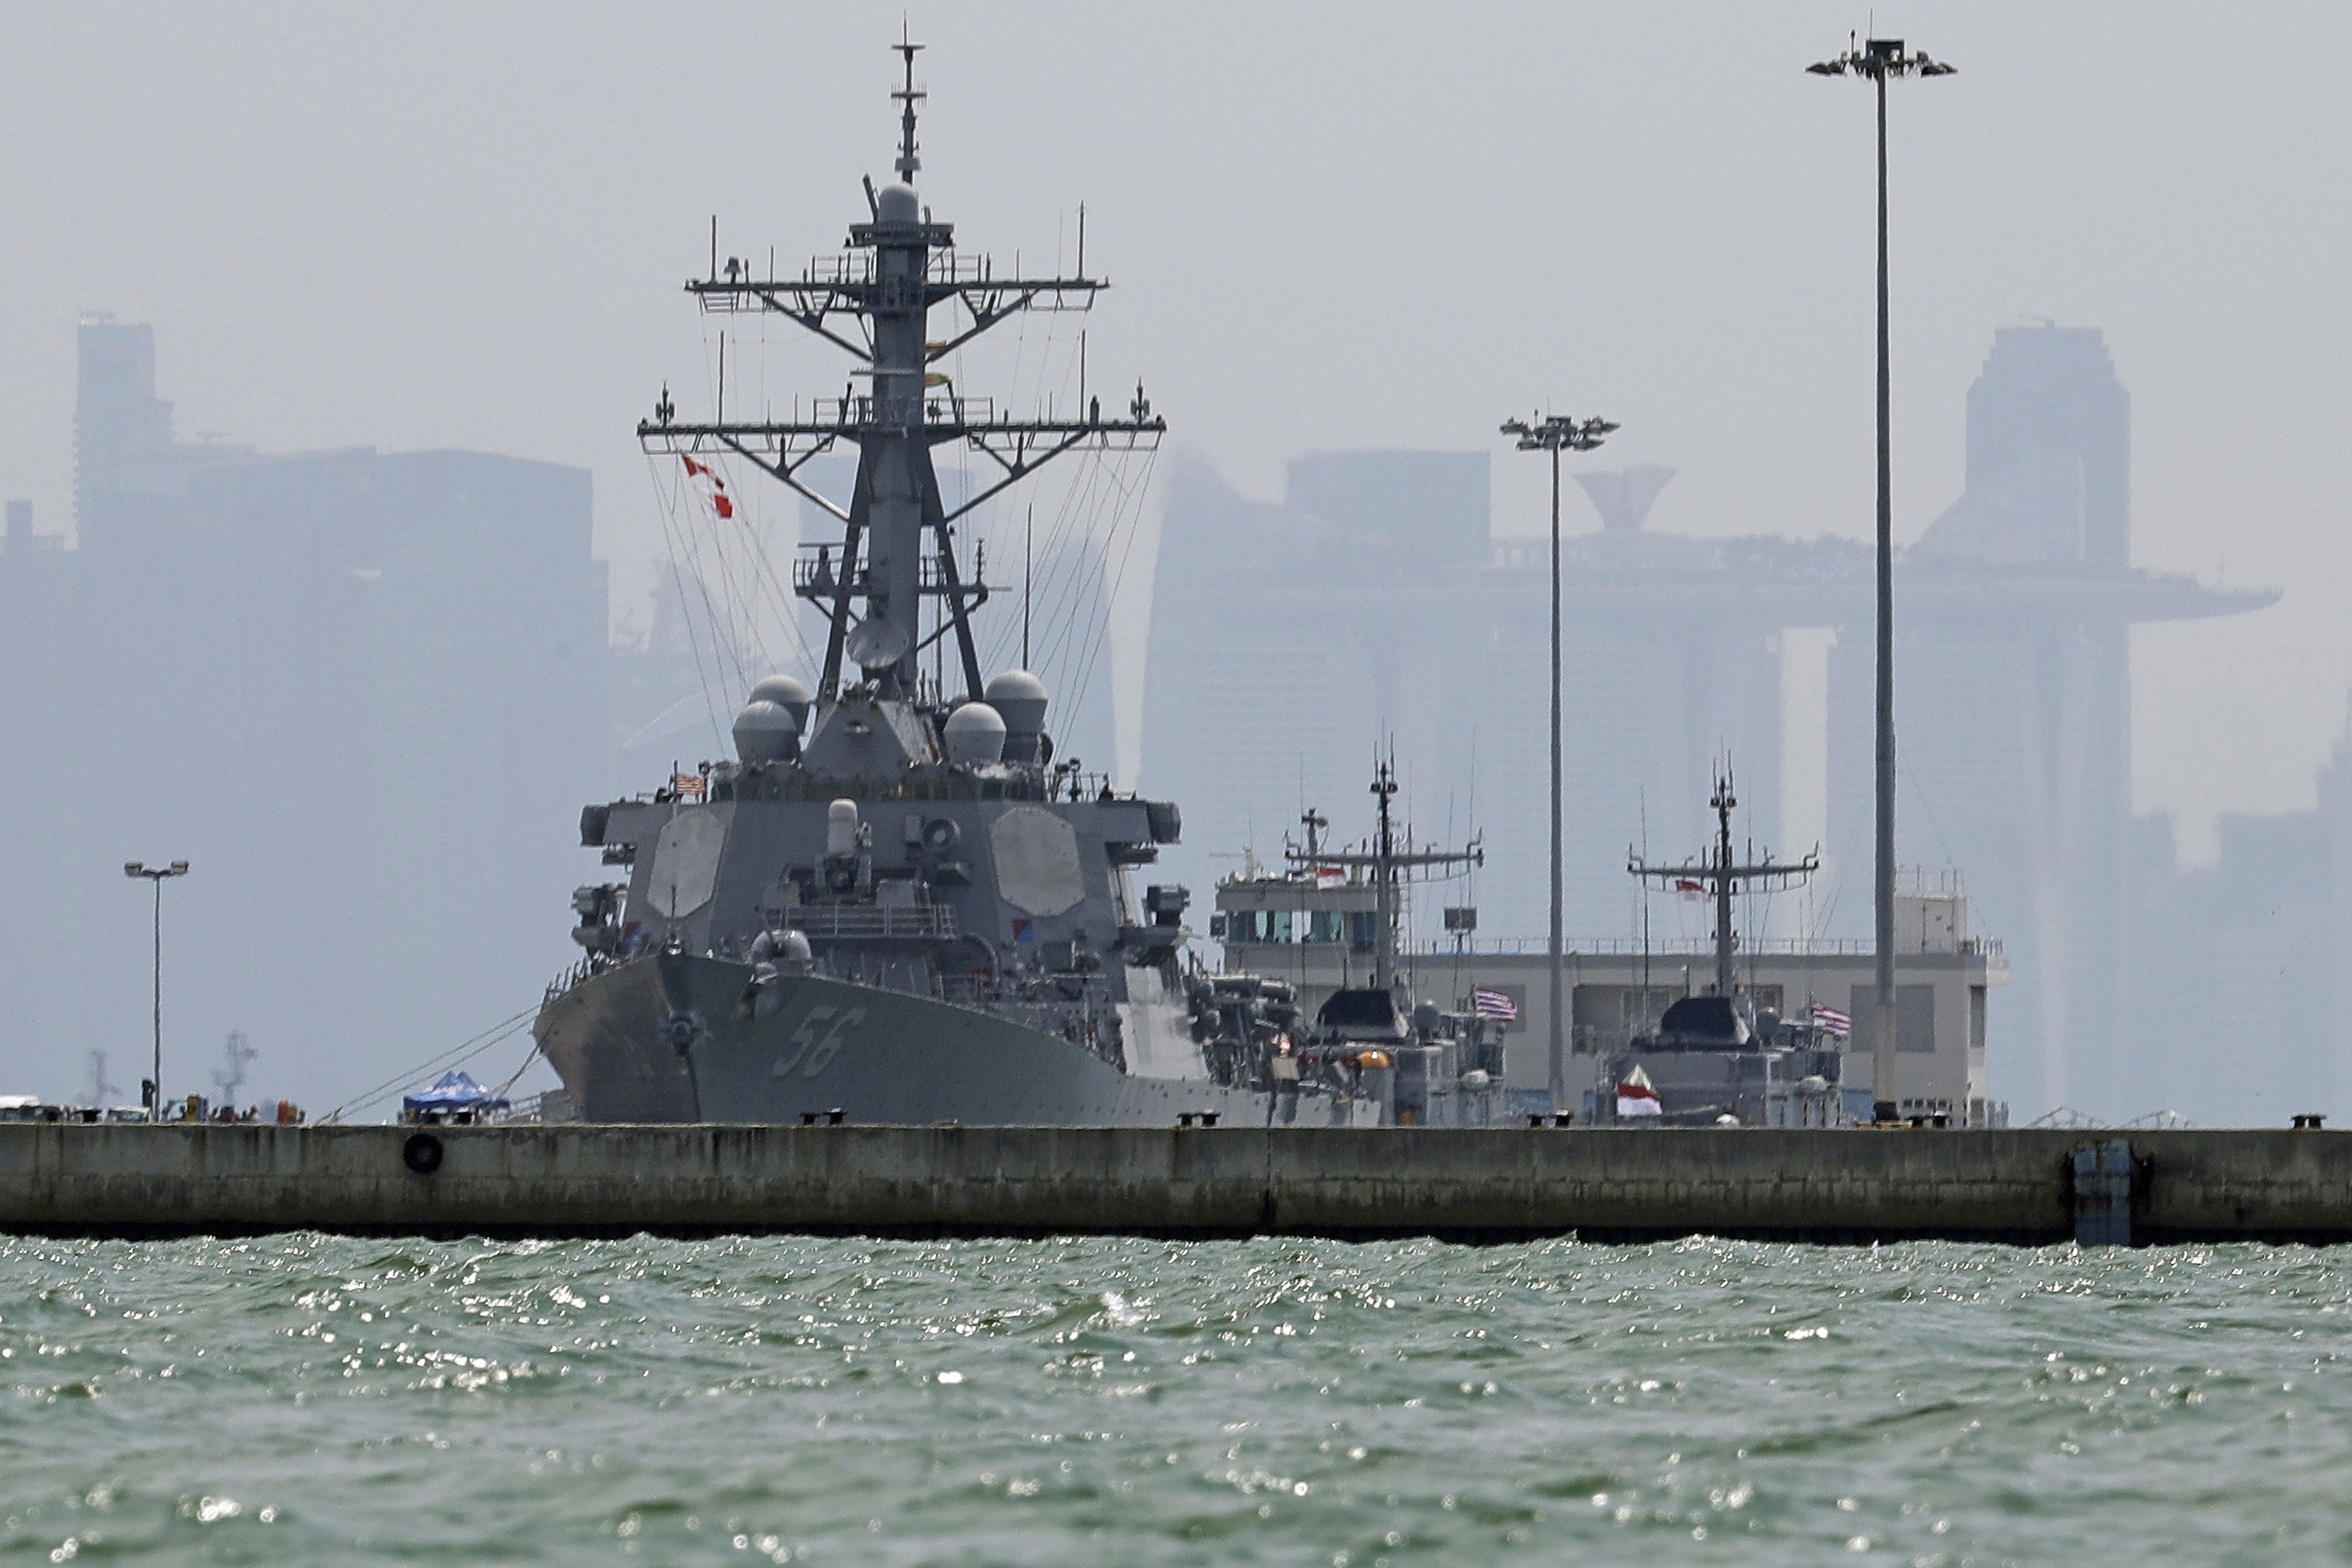 The USS John S. McCain is seen docked at Changi naval base after its accident on Monday, Aug. 21, 2017 in Singapore. The USS John S. McCain was docked at Singapore's naval base with "significant damage" to its hull (blocked by berth) after an early morning collision with the oil tanker Alnic MC as vessels from several nations searched Monday for missing U.S. sailors. (AP Photo/Wong Maye-E)